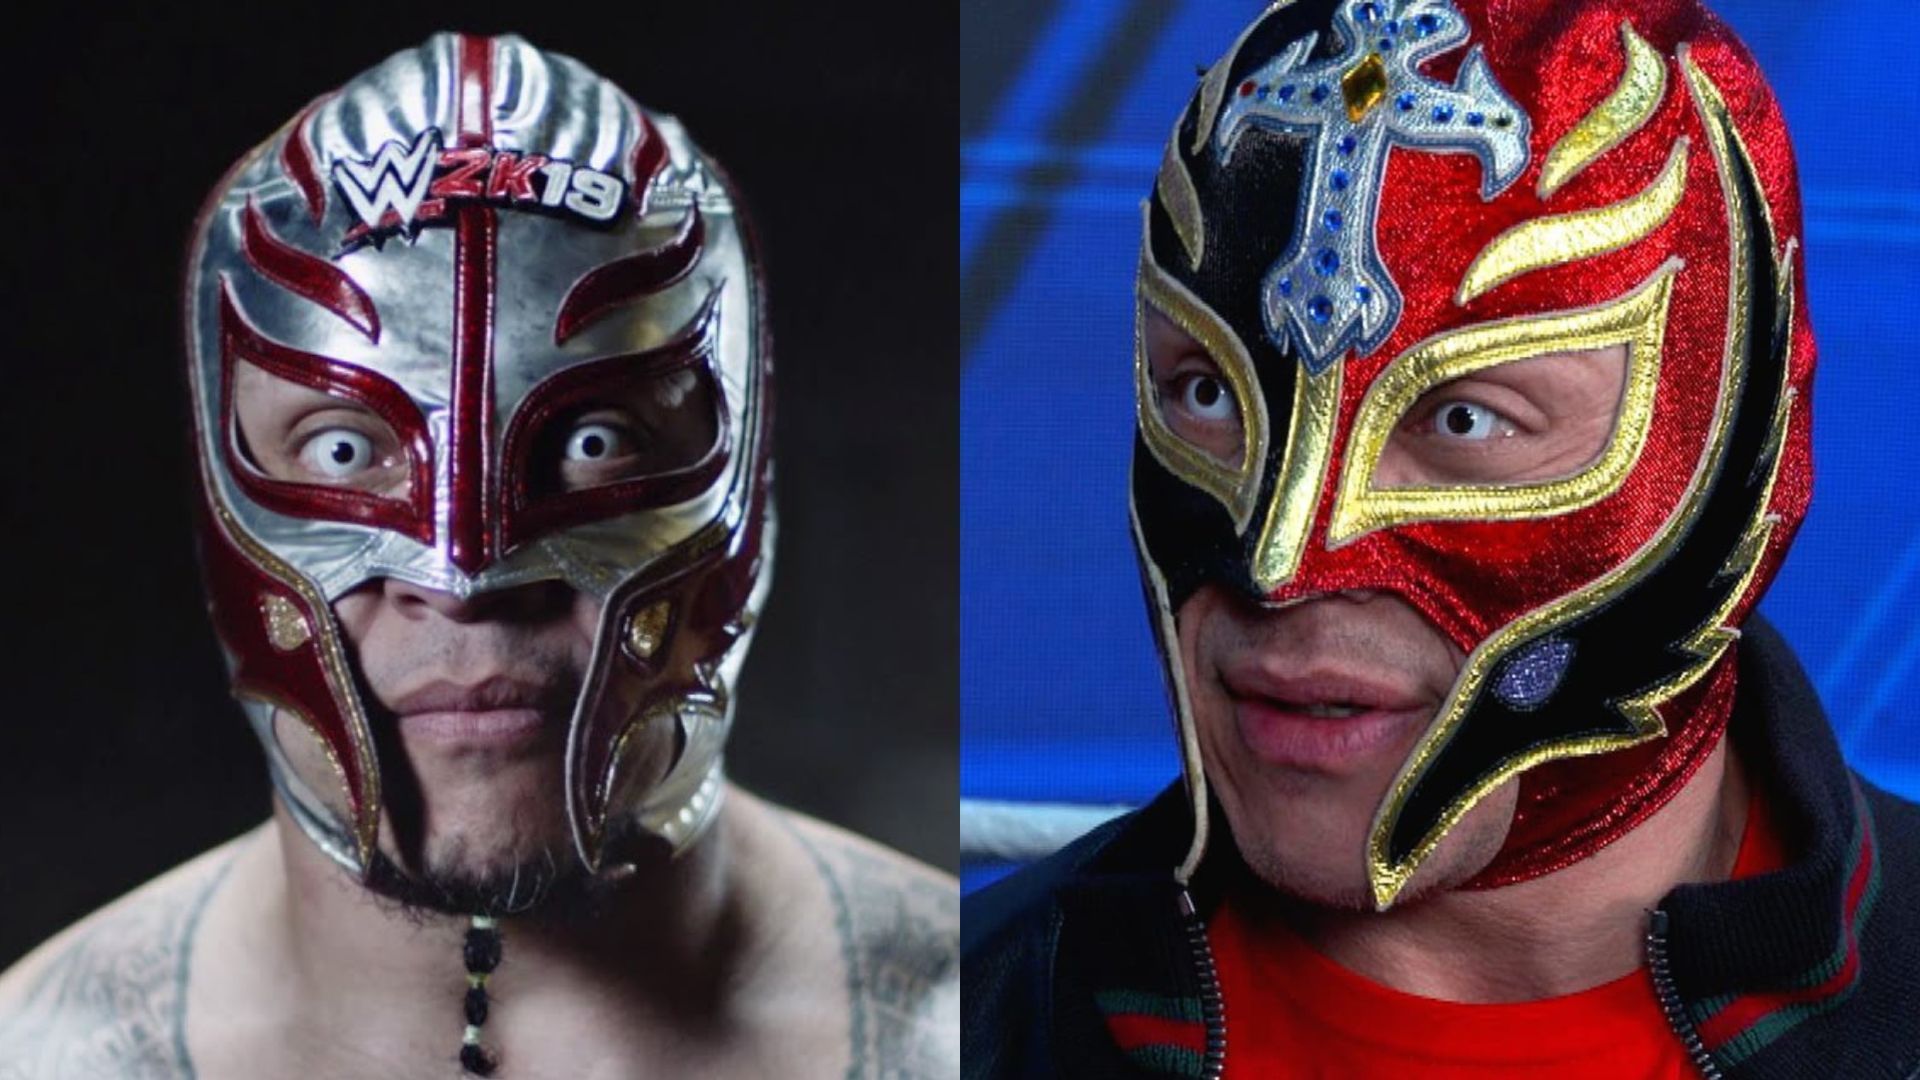 Mysterio is part of the Latino World Order faction on SmackDown.